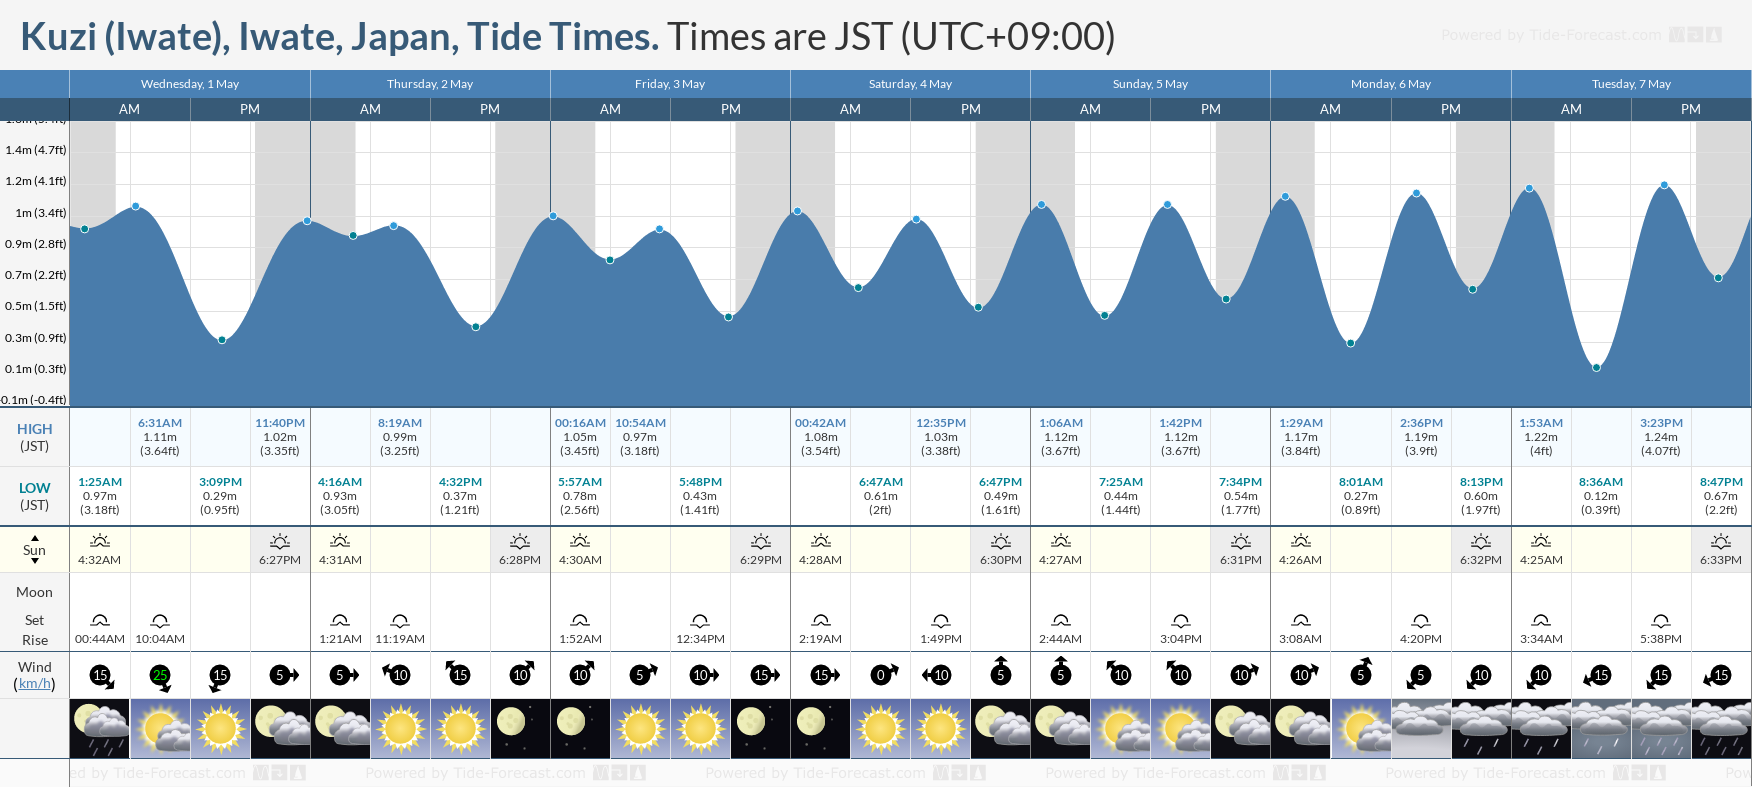 Kuzi (Iwate), Iwate, Japan Tide Chart including high and low tide times for the next 7 days